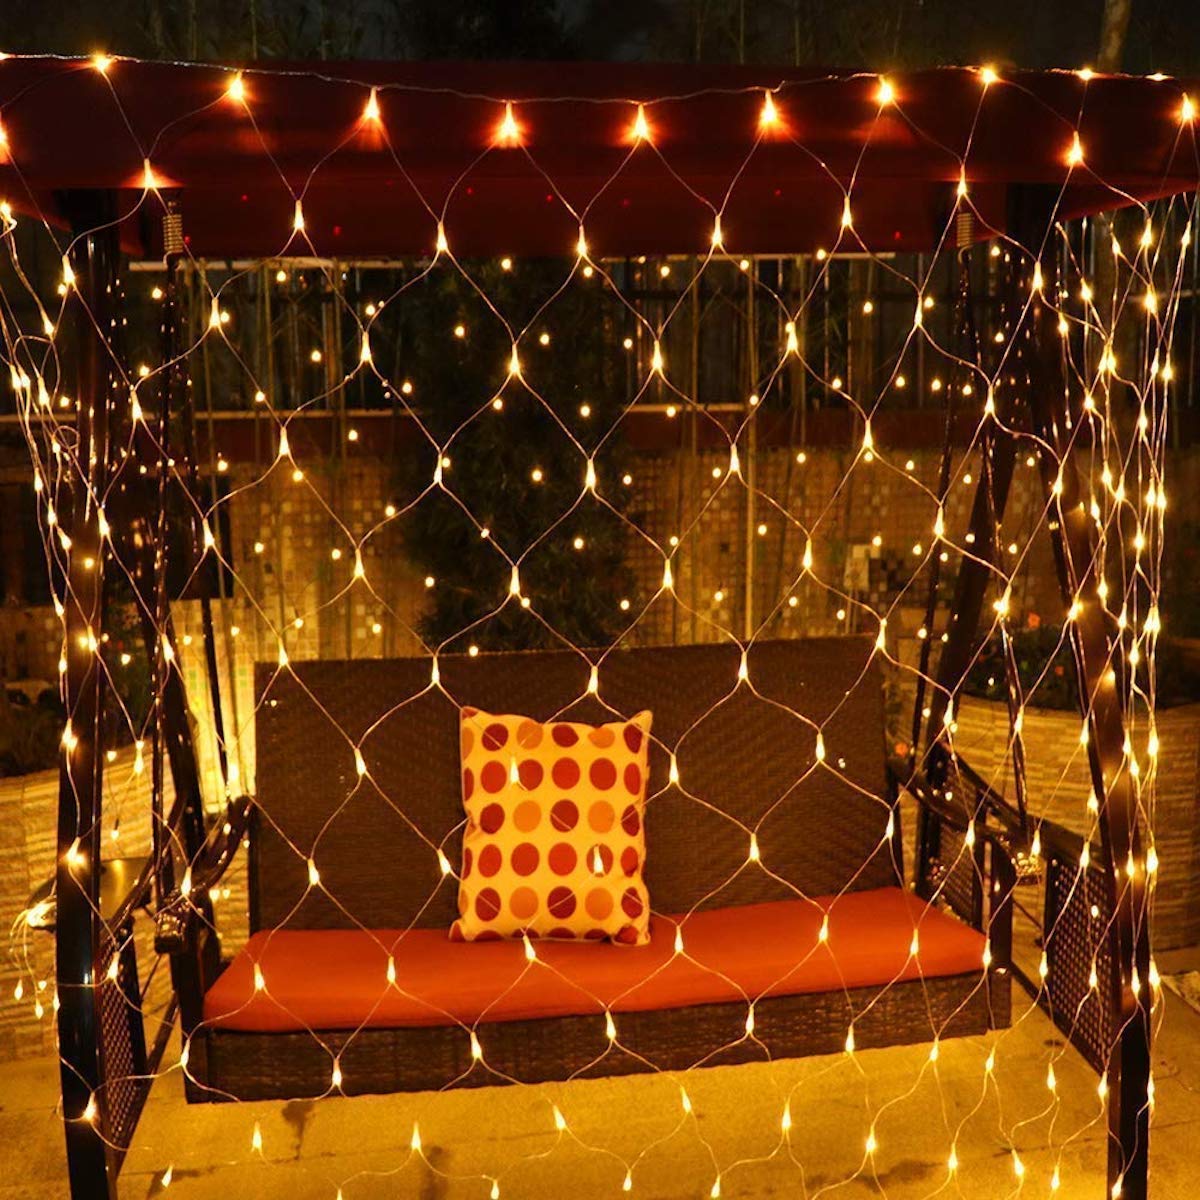 LED String Light ALiLA Copy of LED Net Mesh Jaal Waterfall Curtain light for Window Home Diwali Decoration, 6x8 Feet, WarmWhite LED String Light